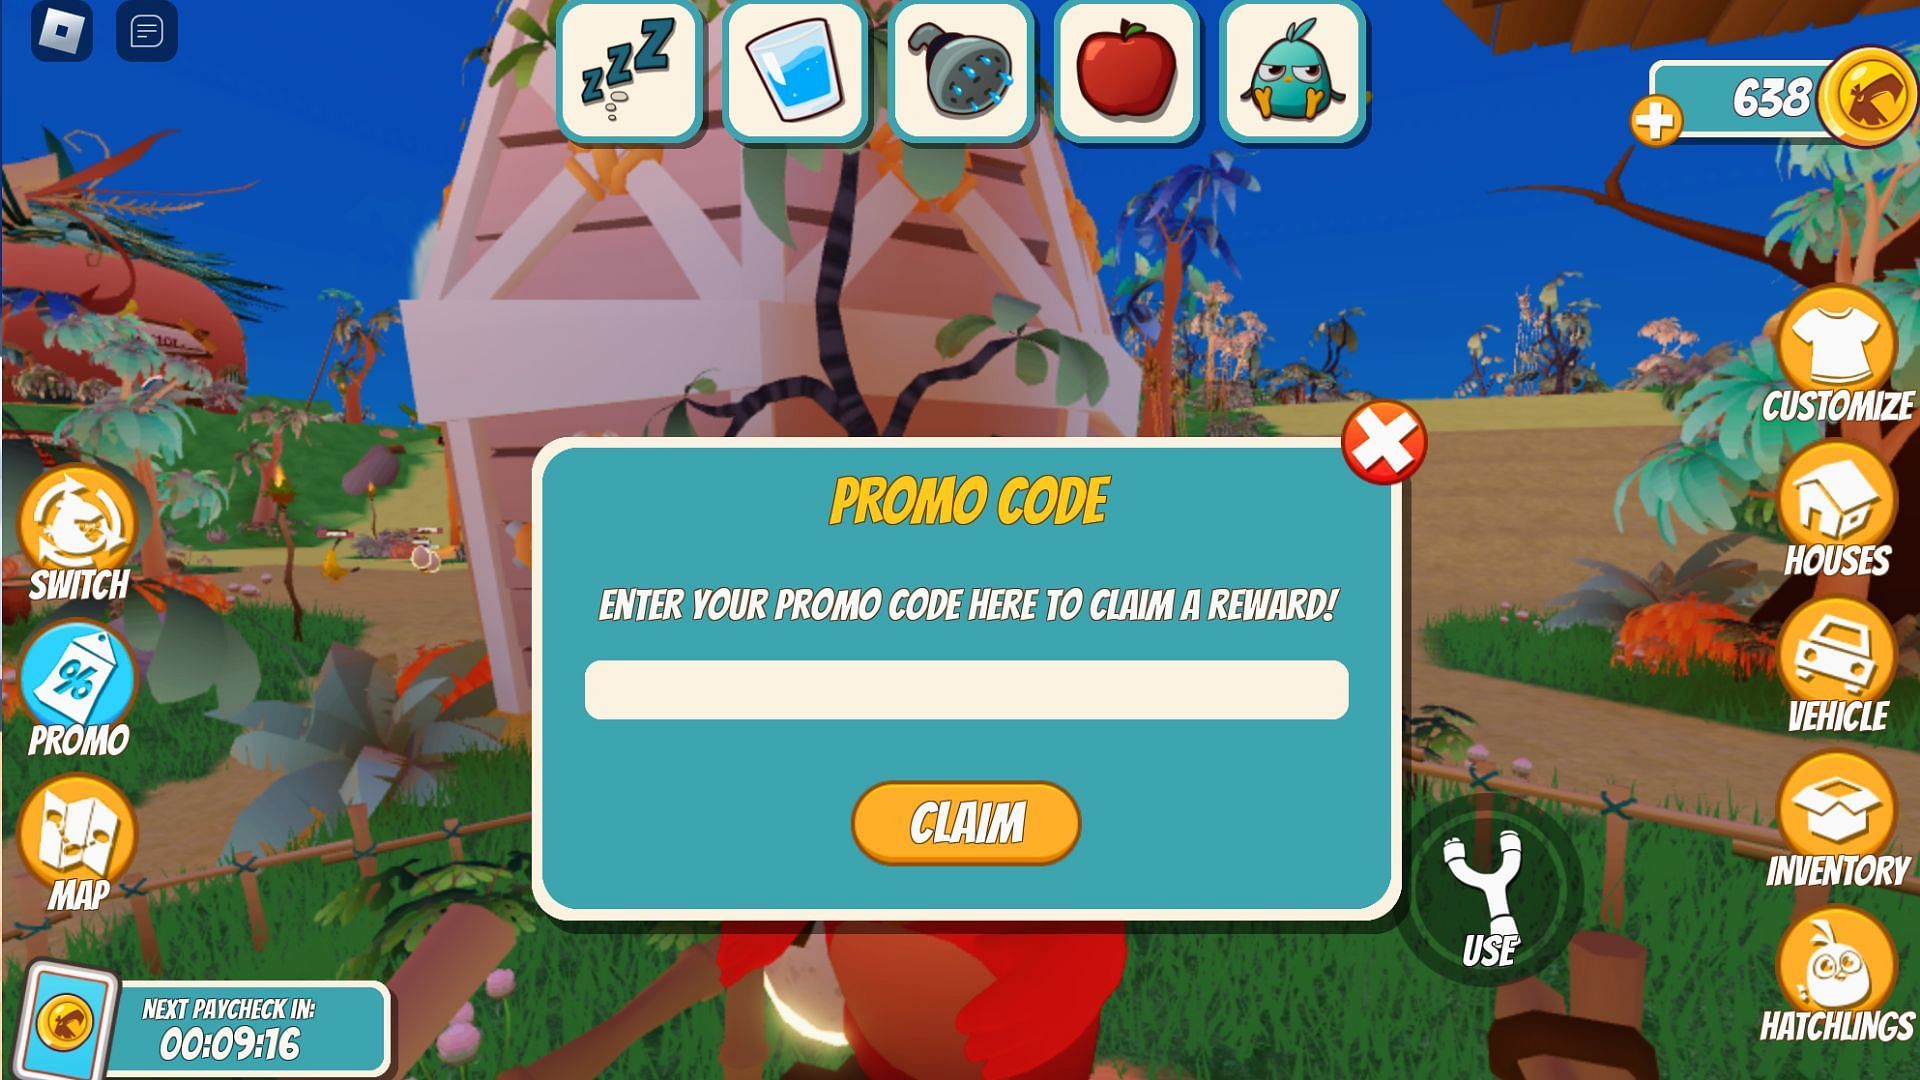 Redeem your codes here (Image via Roblox)